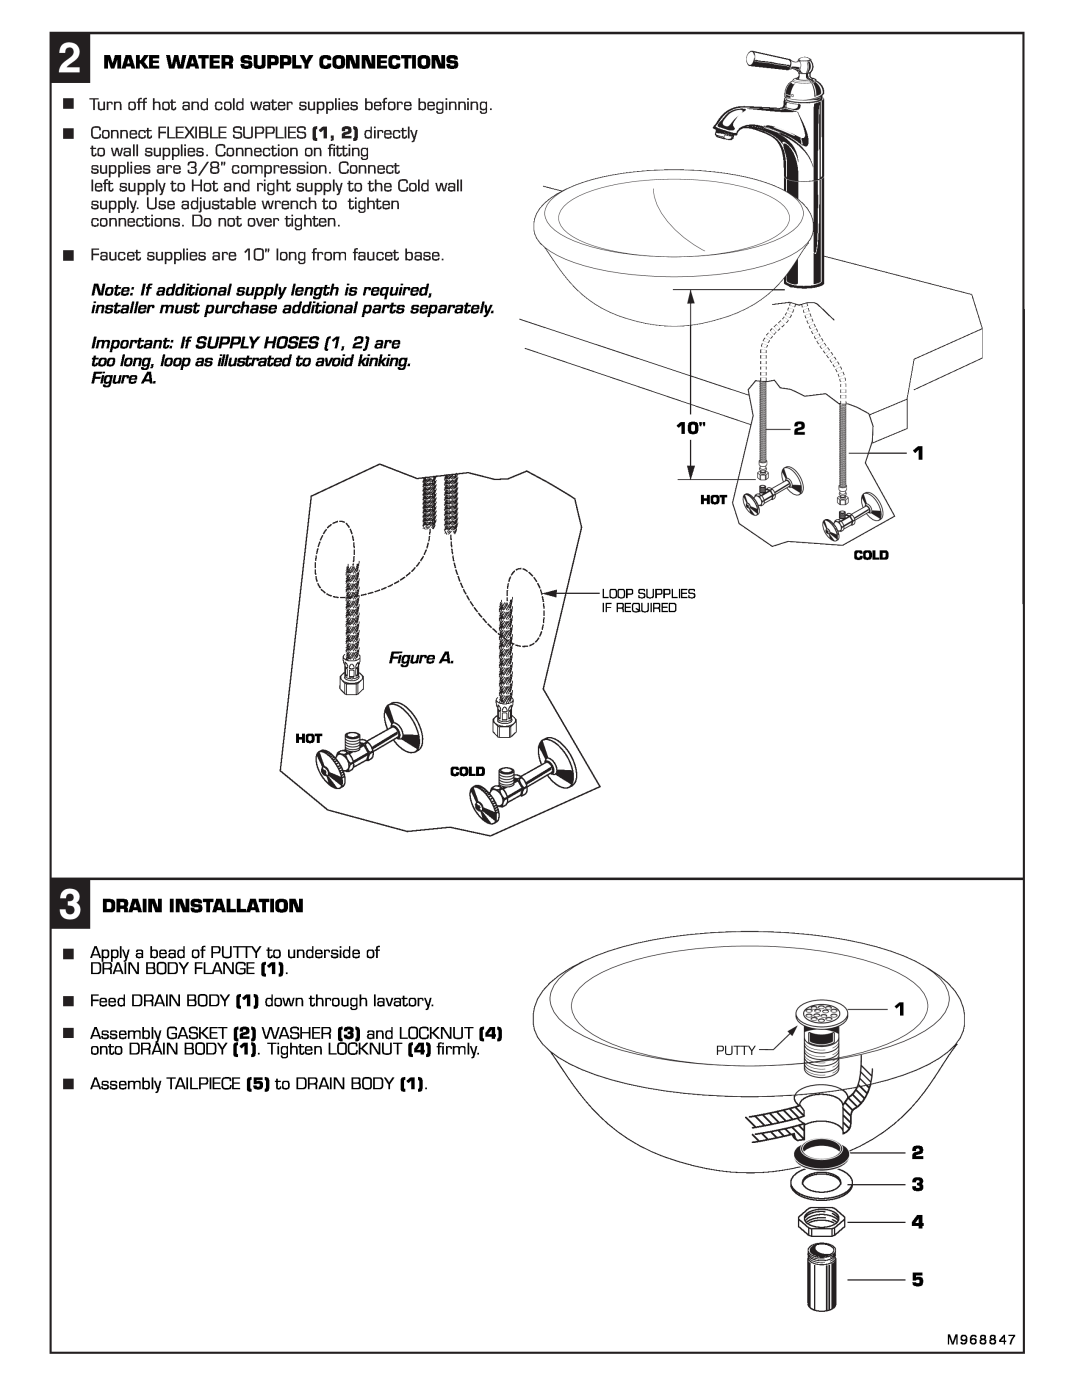 American Standard 4962.150, 4962.151 installation instructions Make Water Supply Connections, Drain Installation 